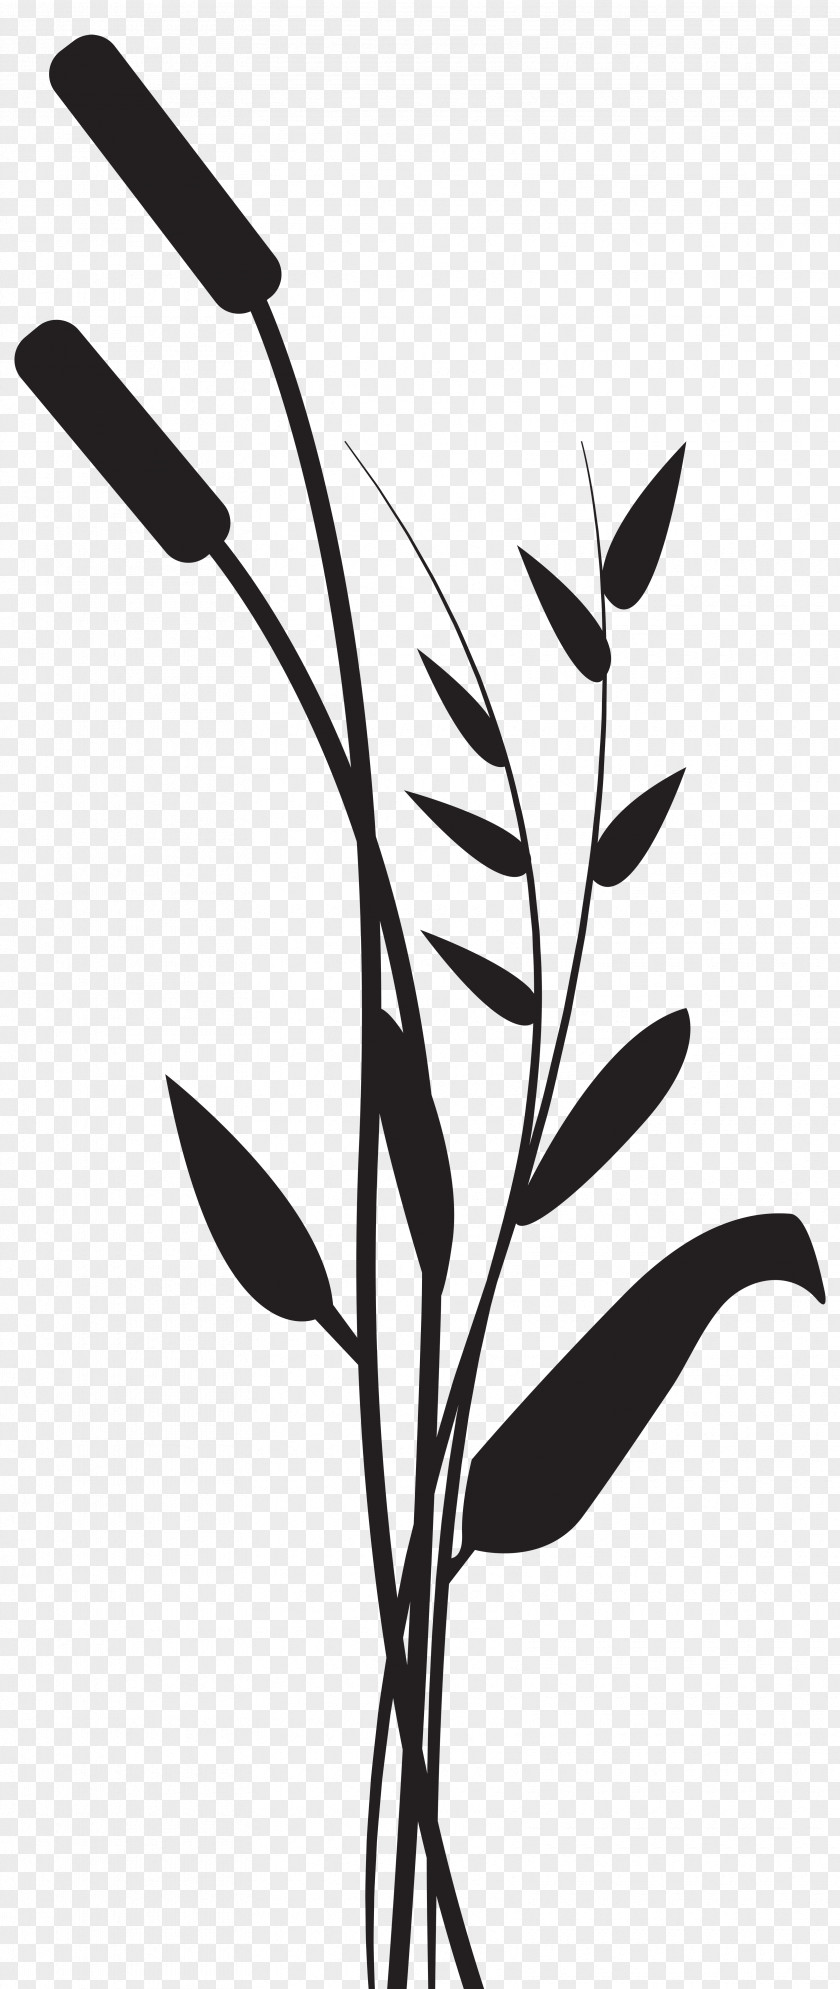 Bulrush Silhouette Transparent Clip Art Image Stock Photography Royalty-free PNG